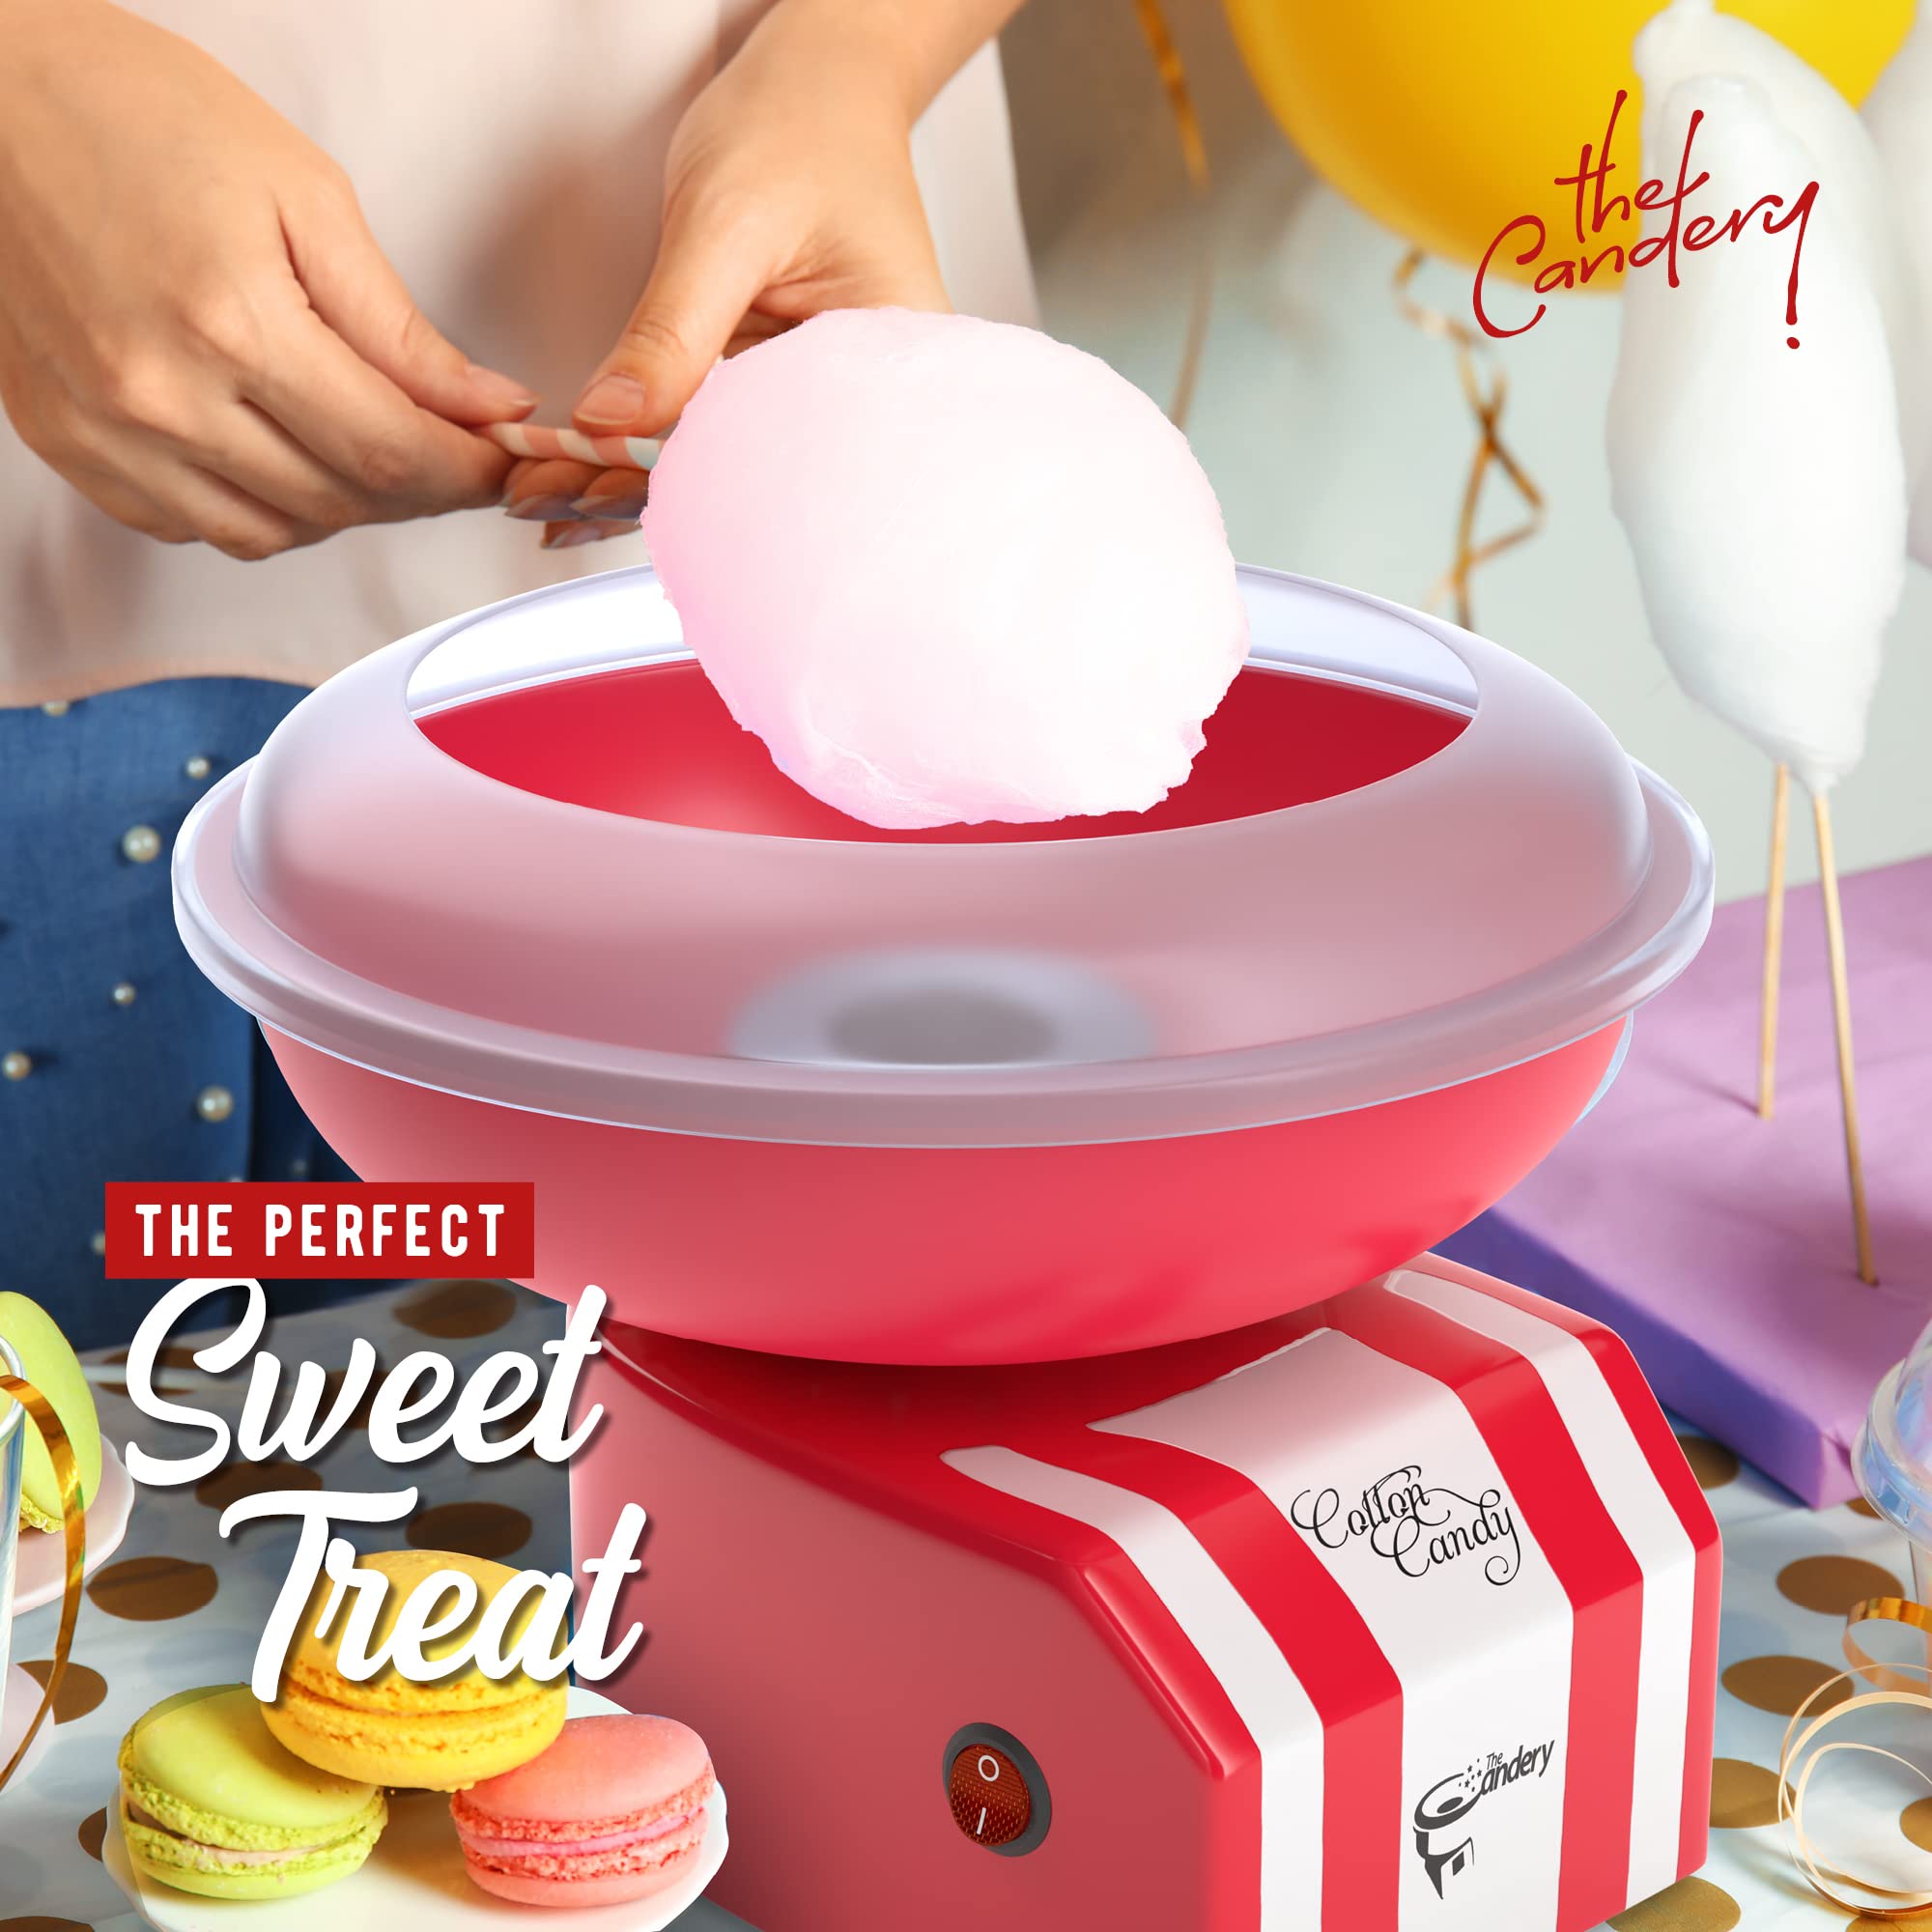 The Candery Cotton Candy Machine - Bright, Colorful Style- Makes Hard and Sugar Free Candy, Sugar Floss, Homemade Sweets for Birthday Parties - Includes 10 Cones & Scooper